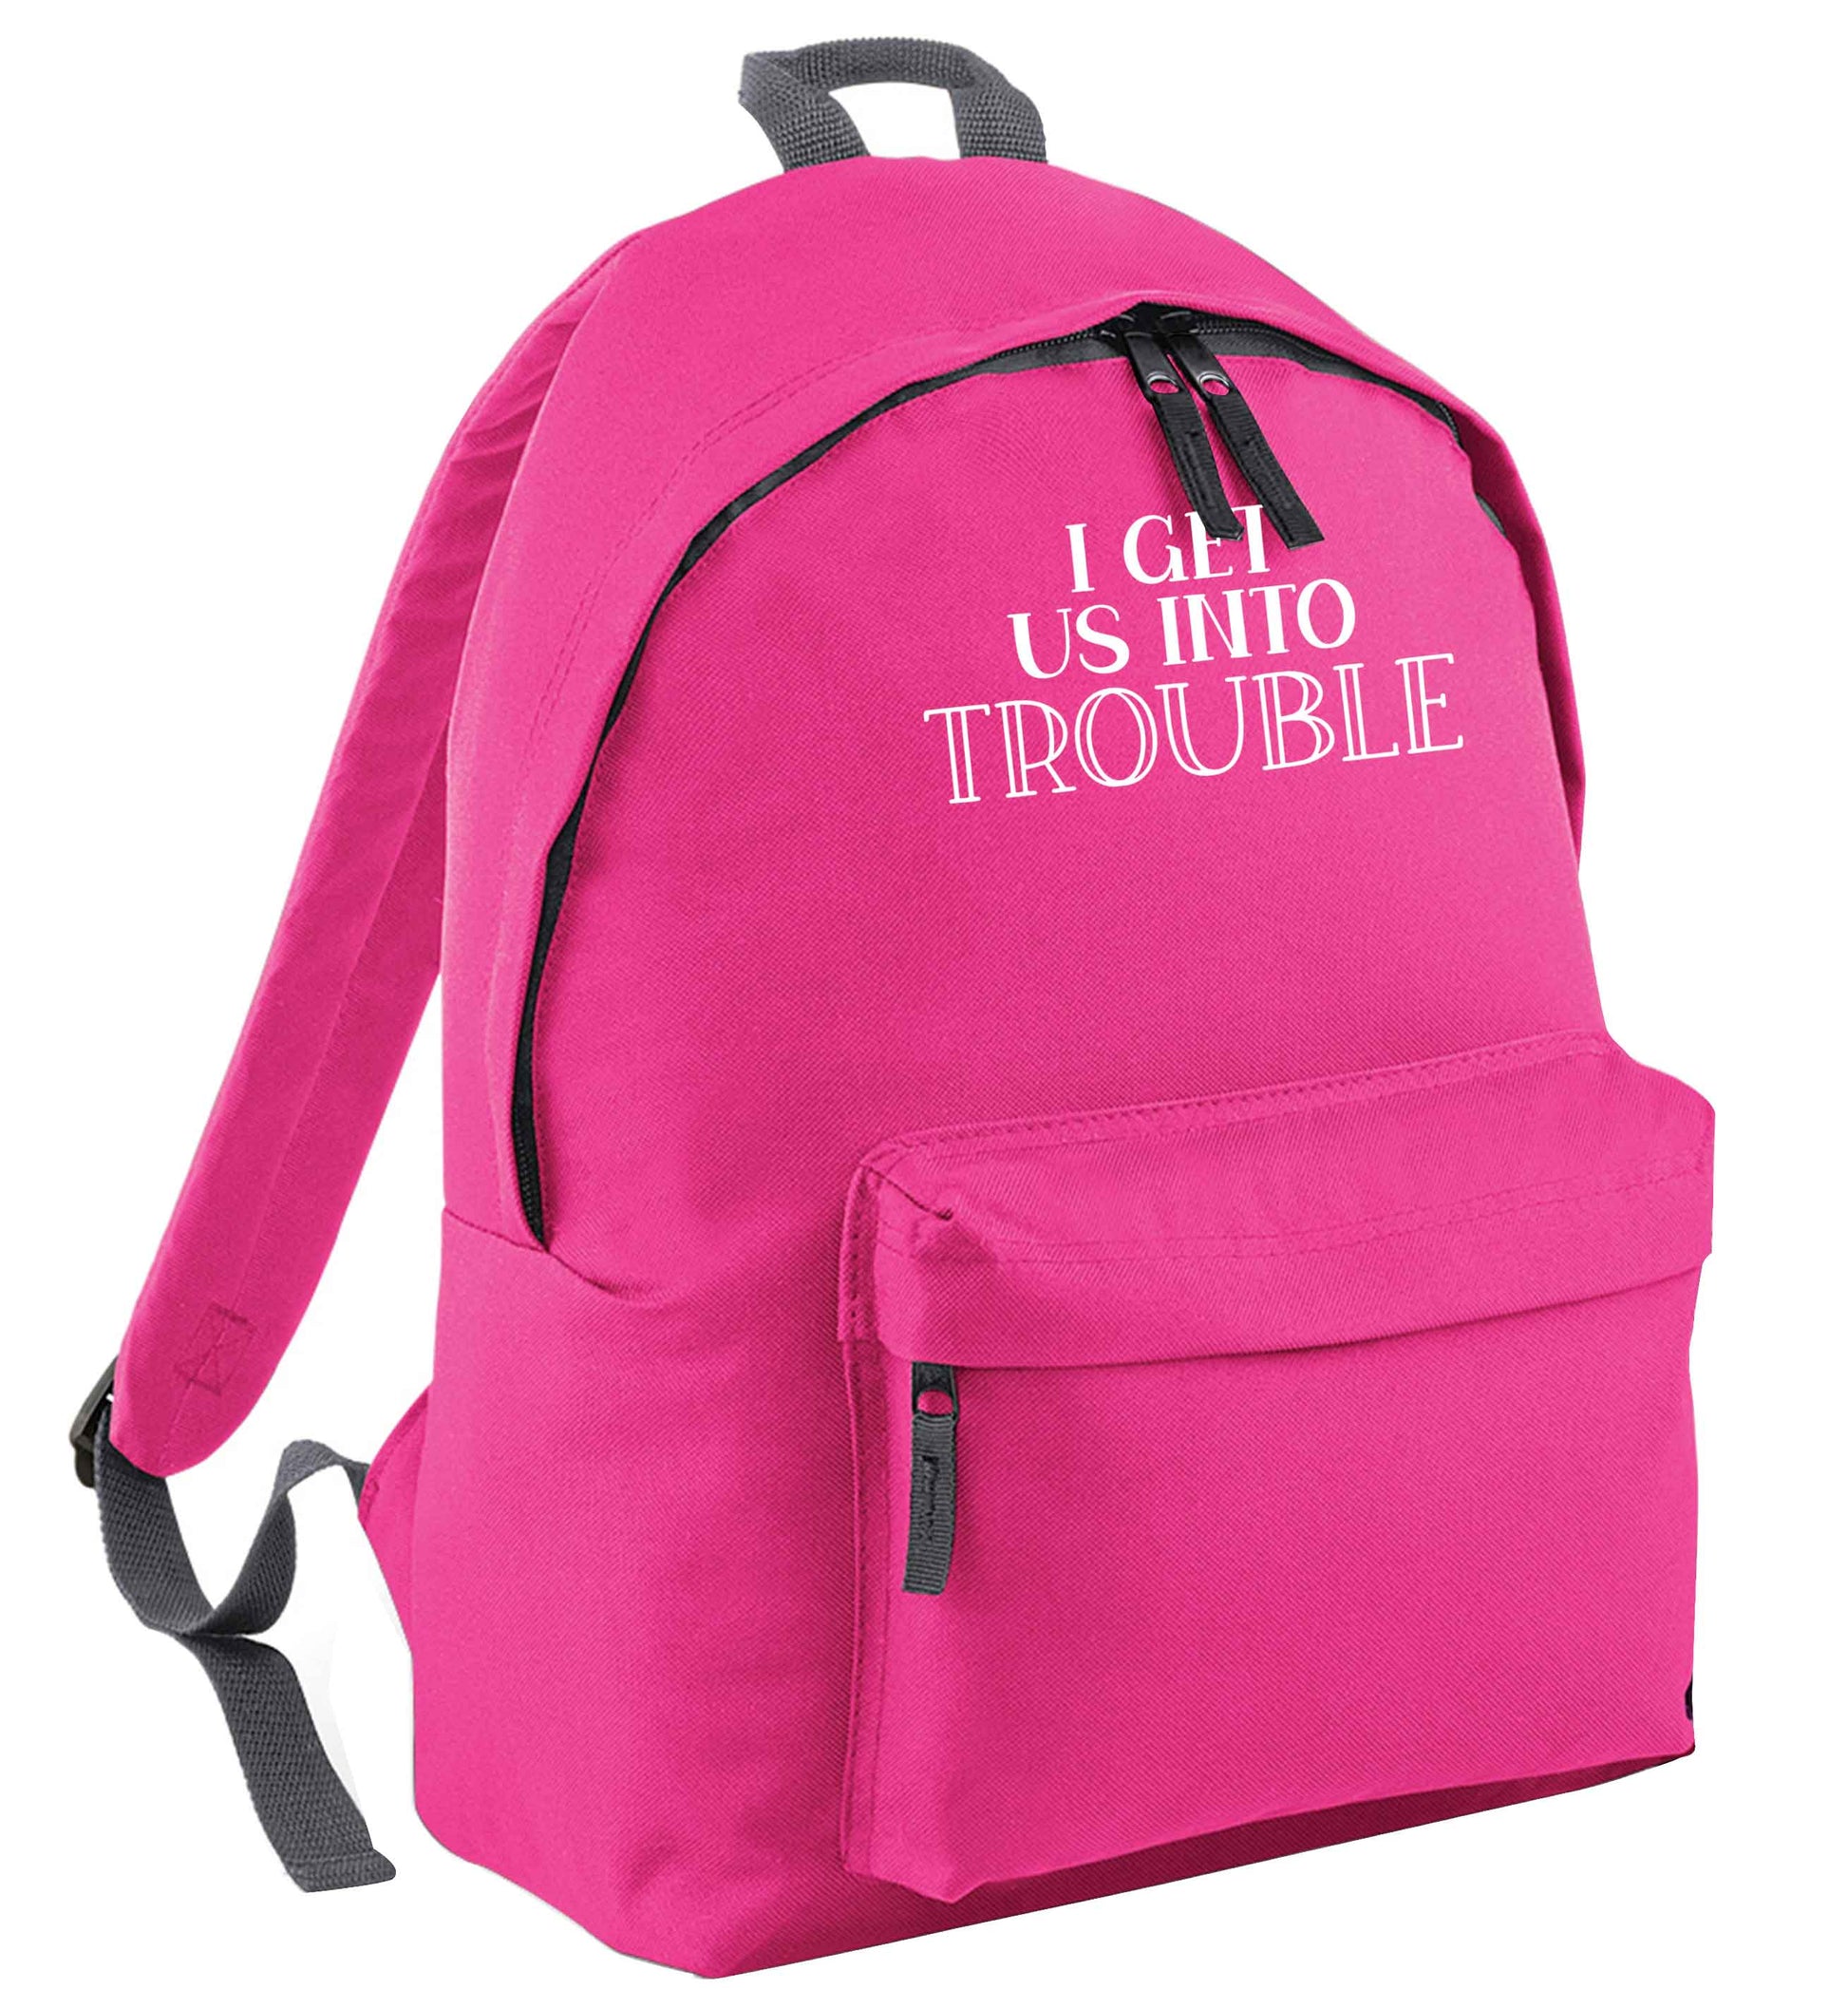 I get us into trouble | Children's backpack